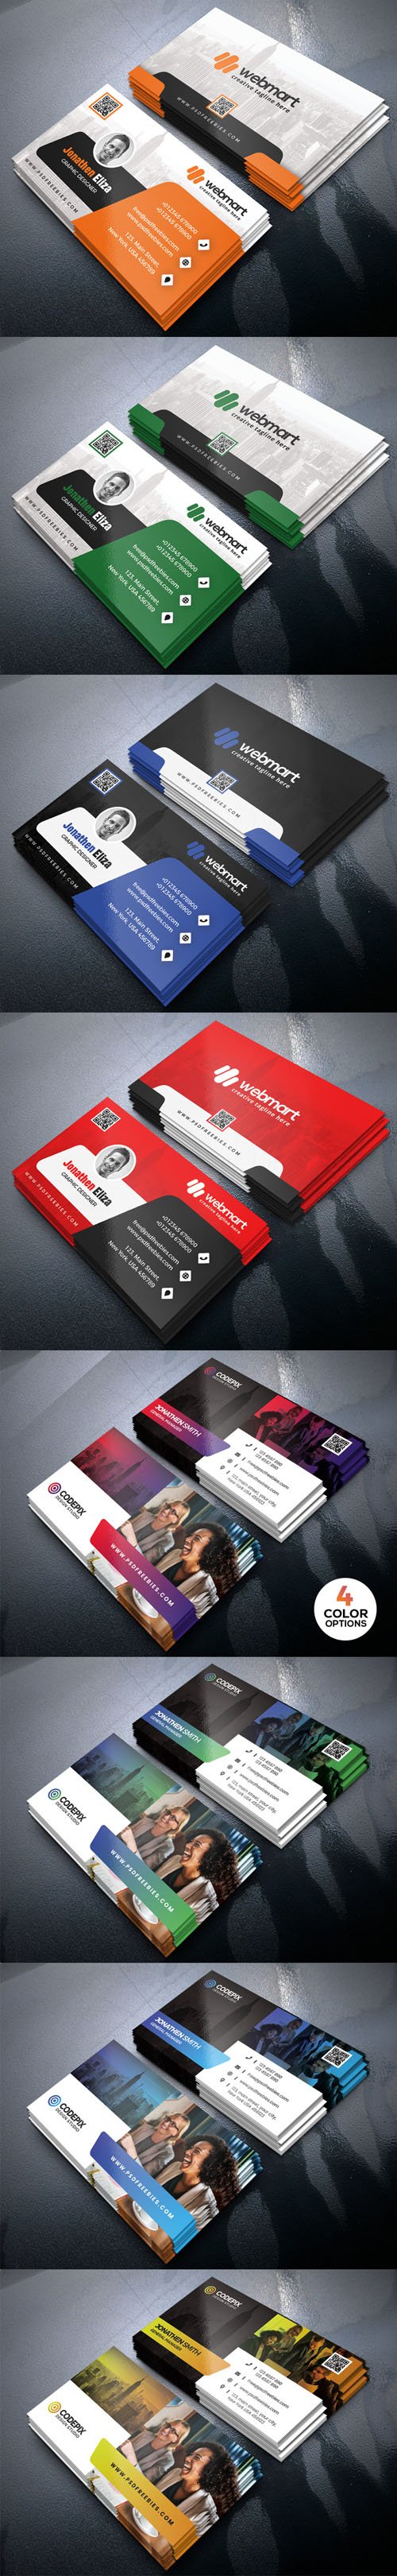 16 Multipurpose Business Cards PSD Templates Collection